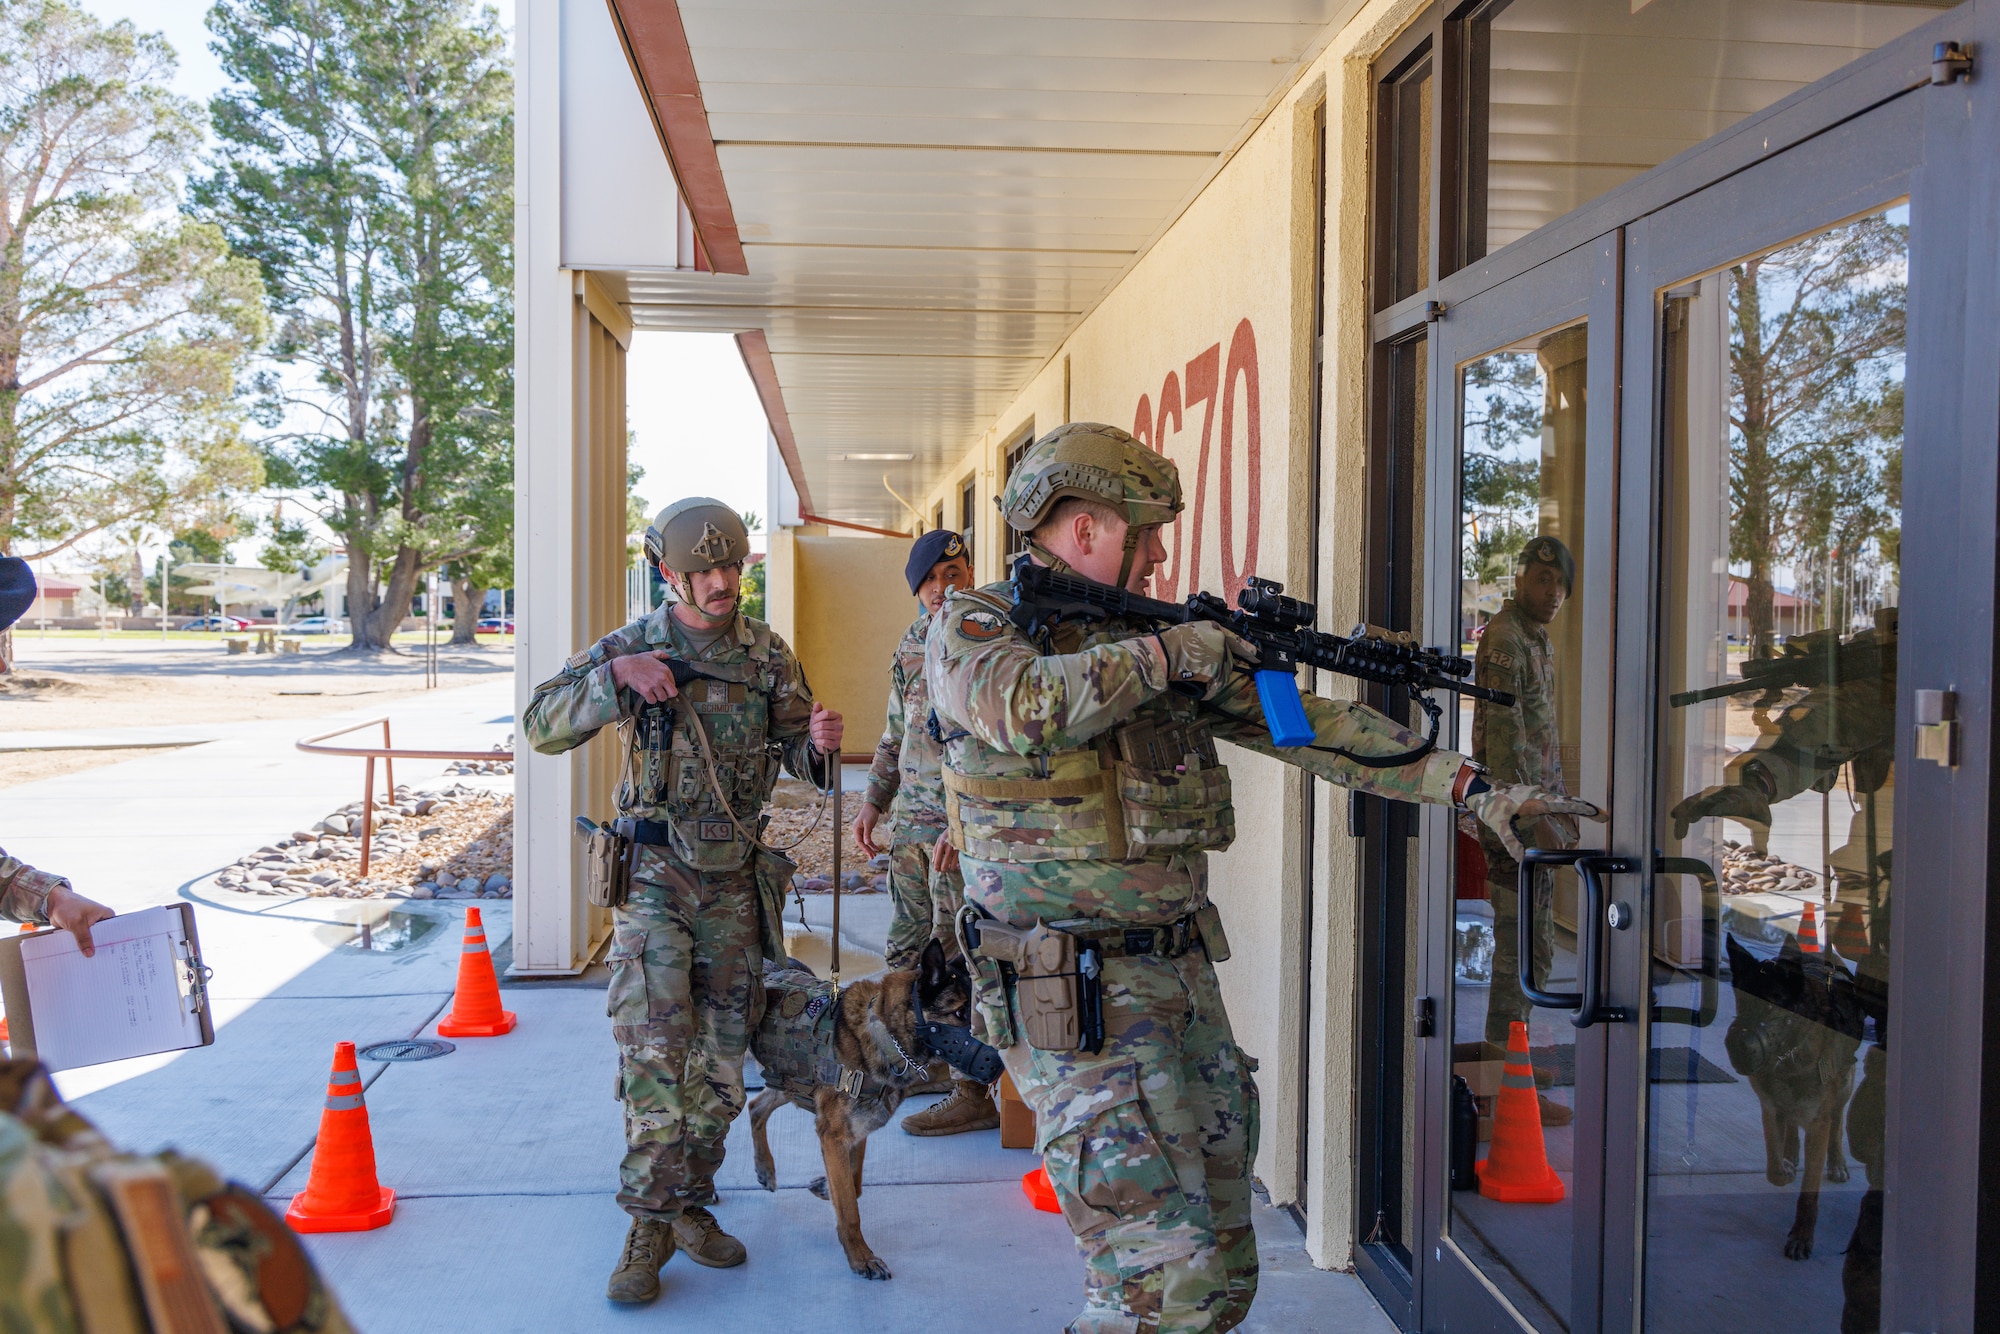 412th Security Forces Squadron prepare to enter a building with a suspected active shooter during an exercise at Edwards Air Force Base, California, March 7. (Air Force photo by C.J. Raterman)